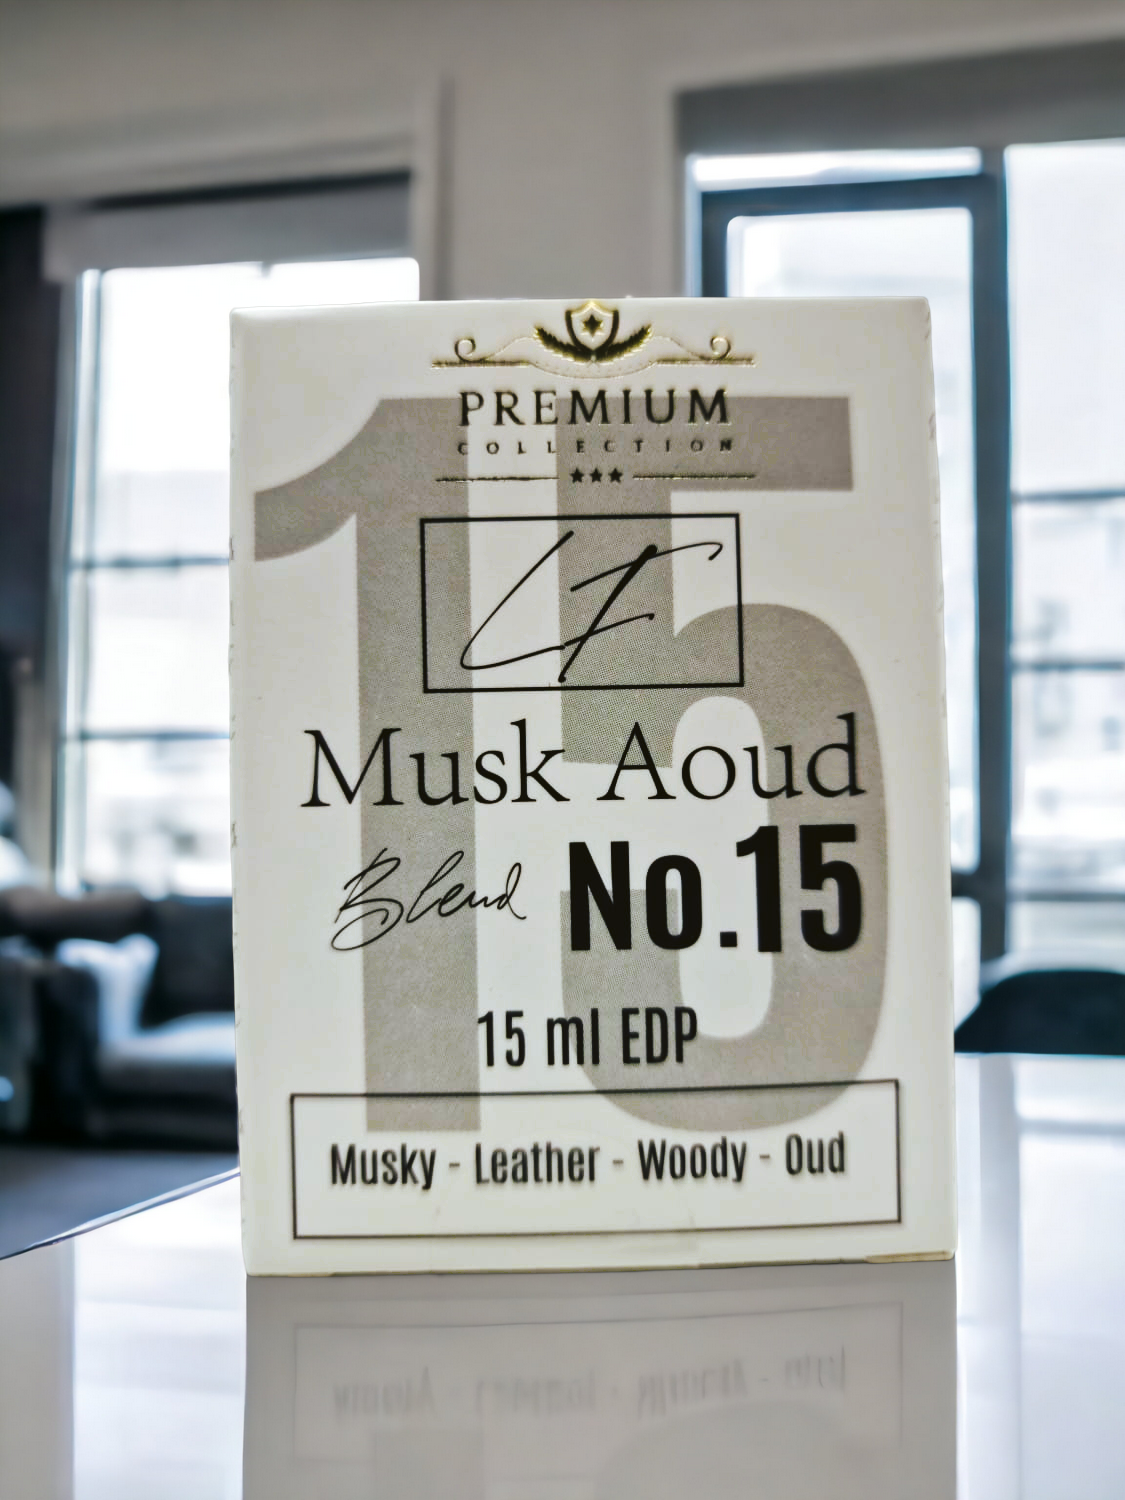 Blend No.15 Musk Aoud by Livfragrance® Signature Collection